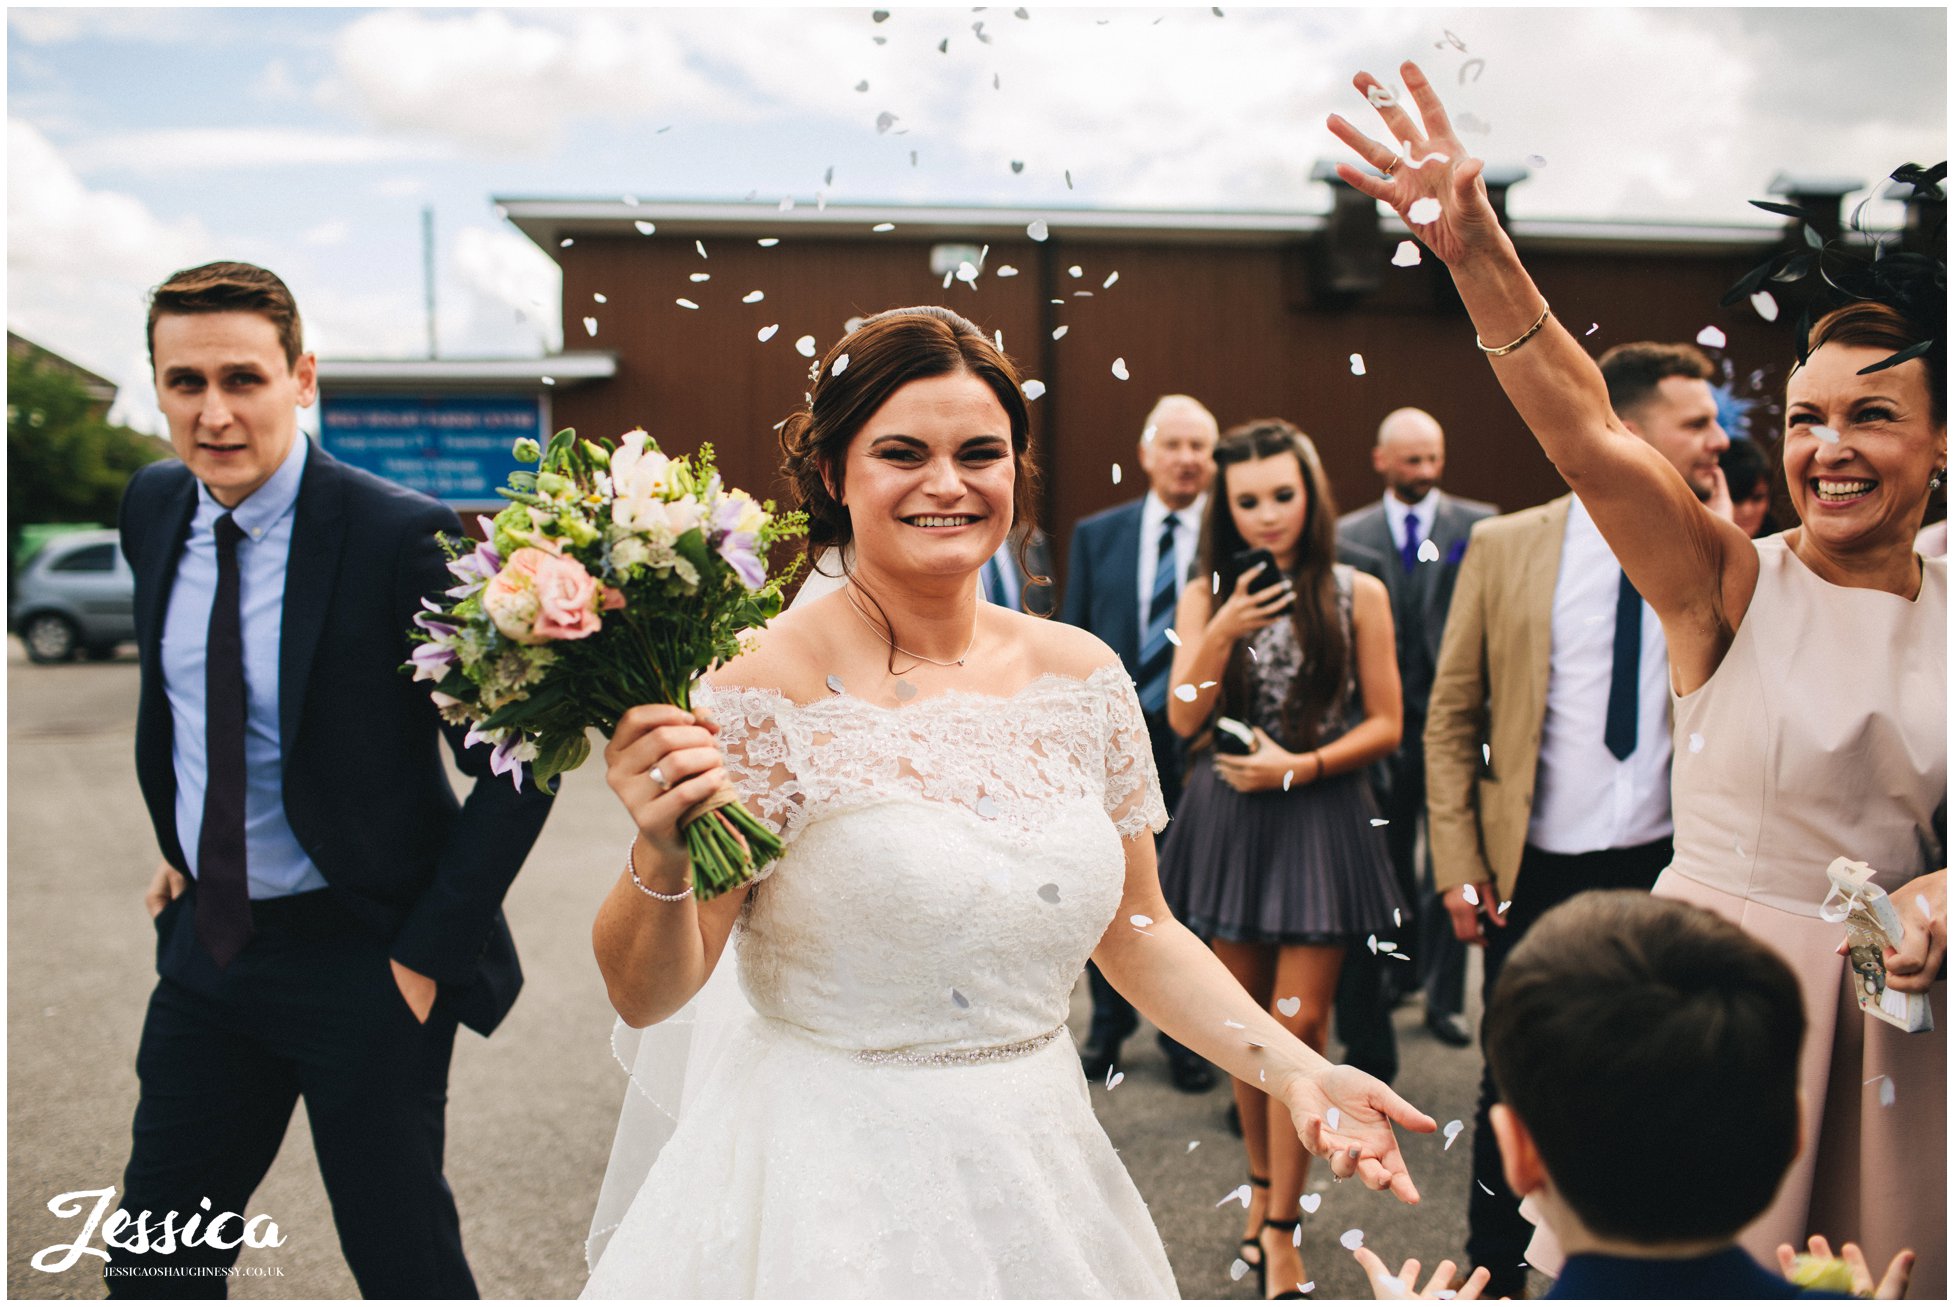 guests throw confetti over the bride